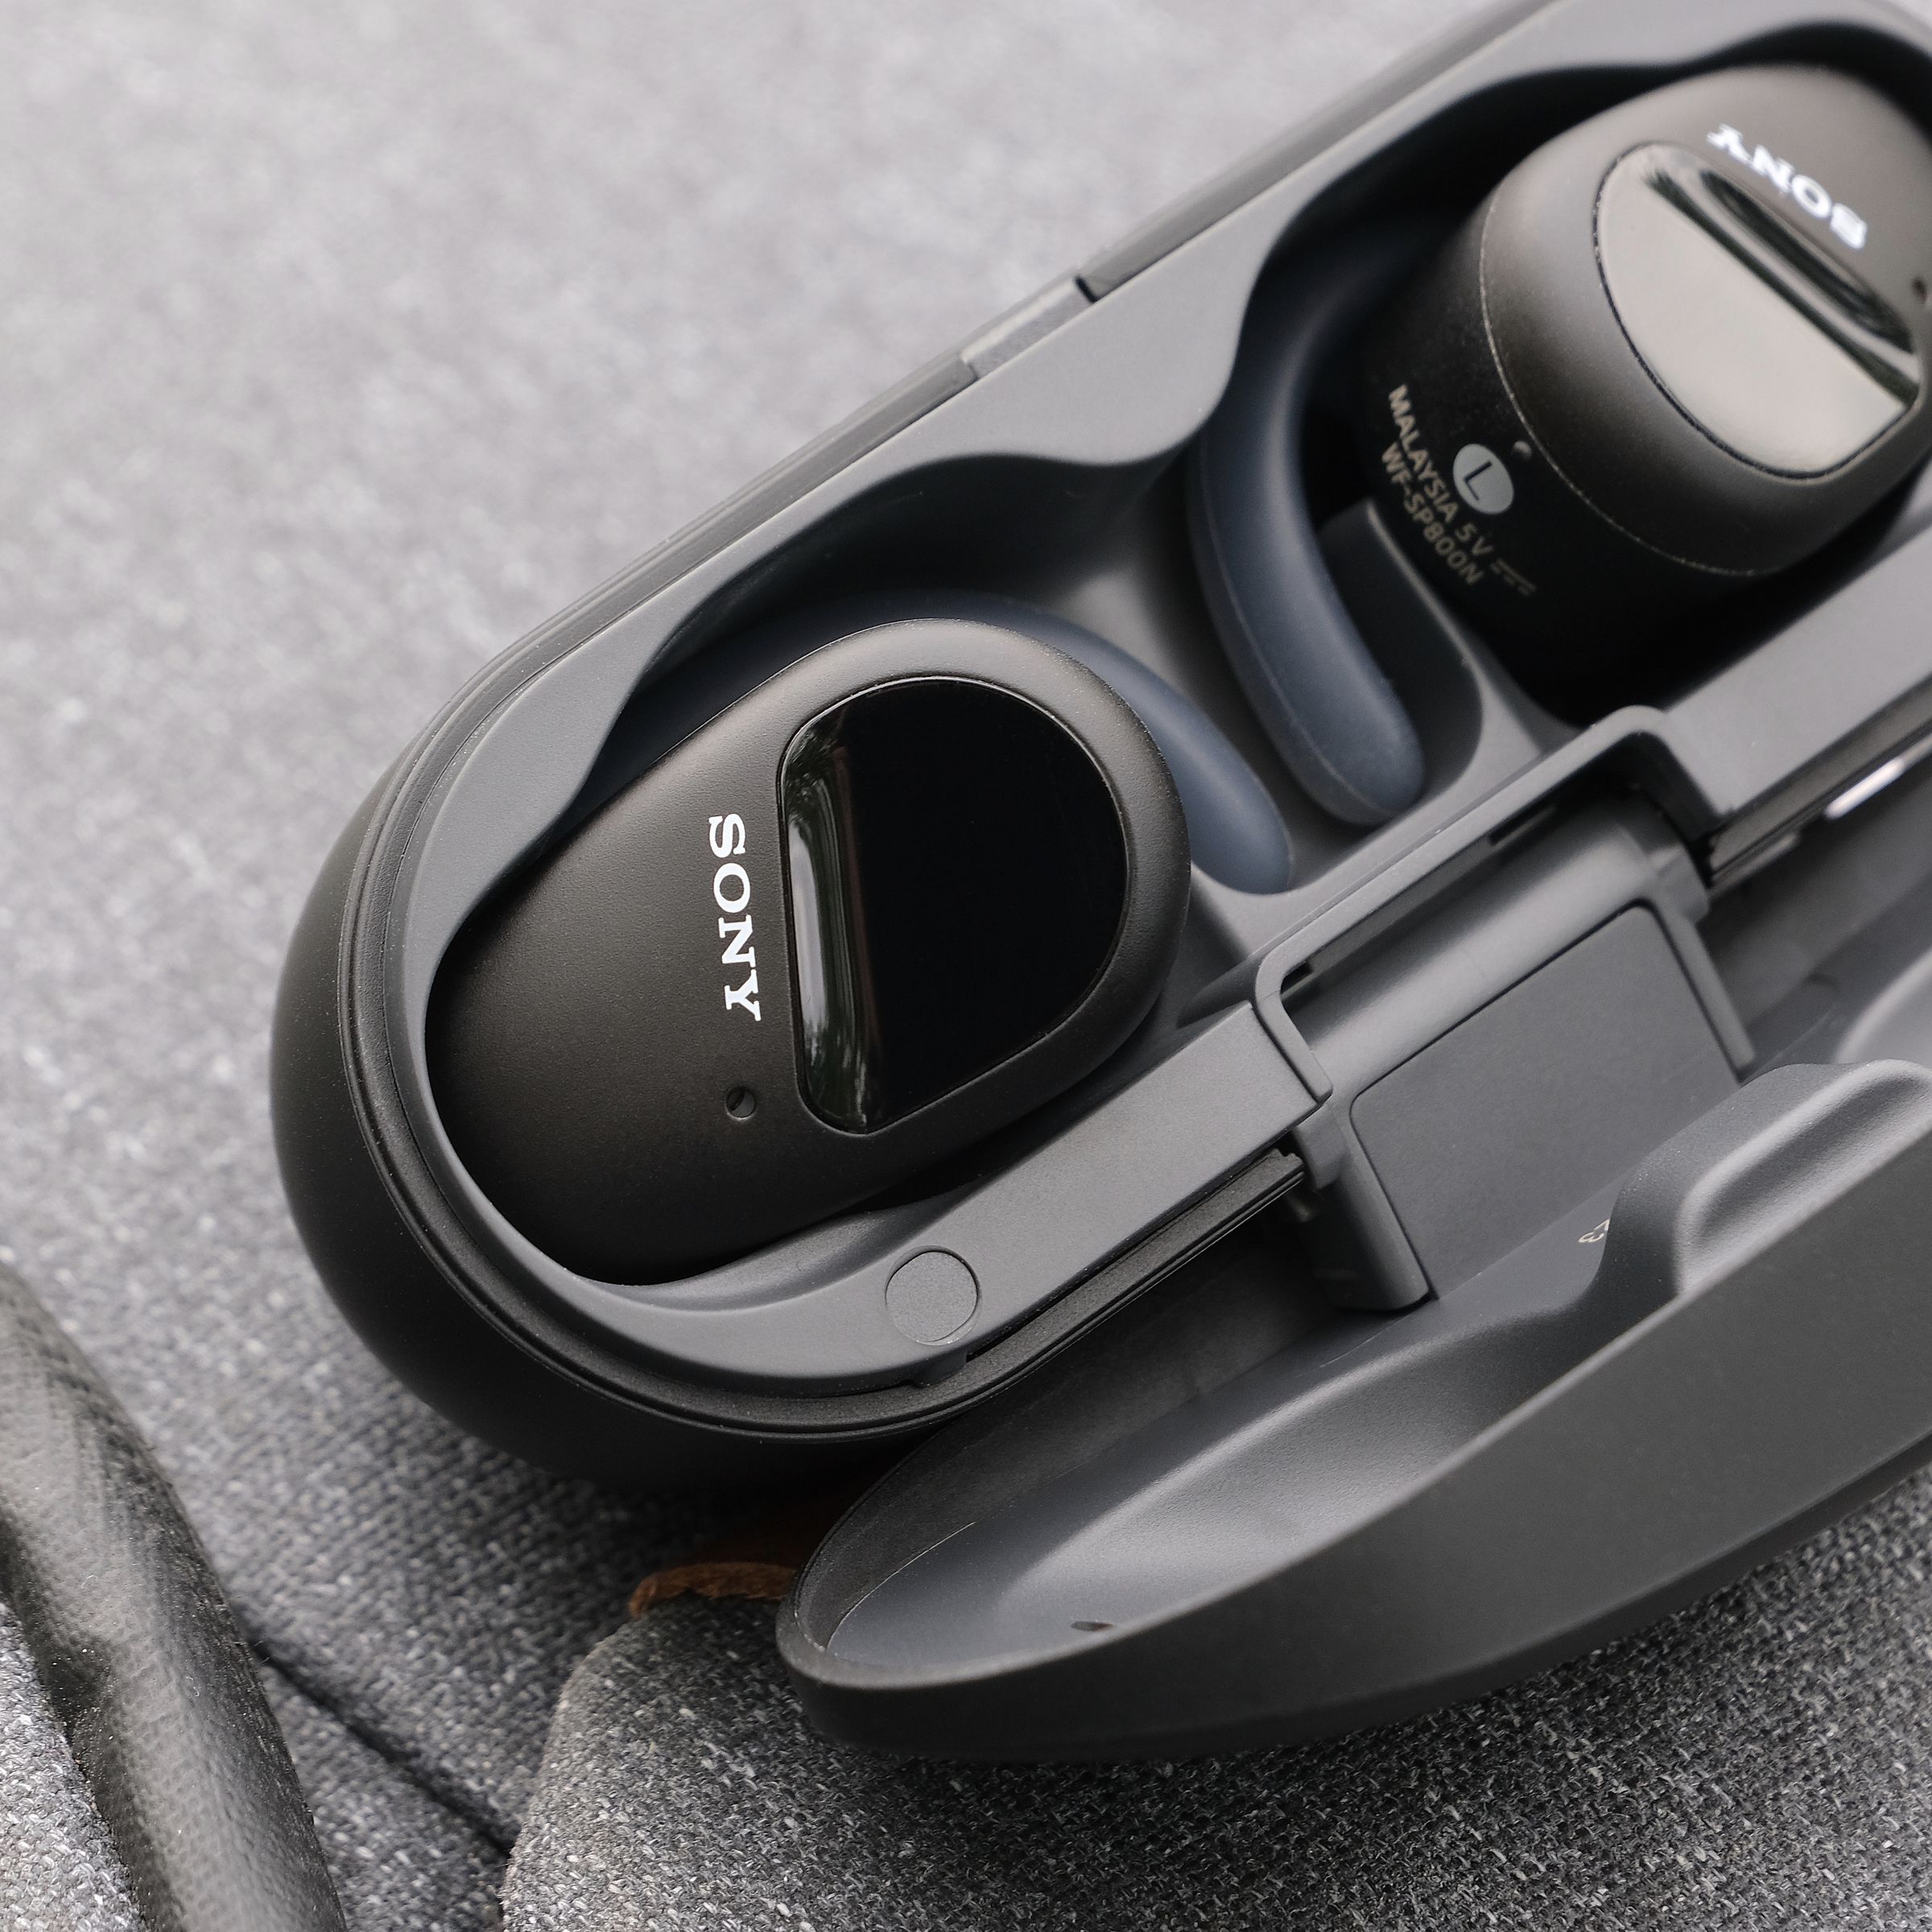 An overhead view of Sony’s SP-800N earbuds.